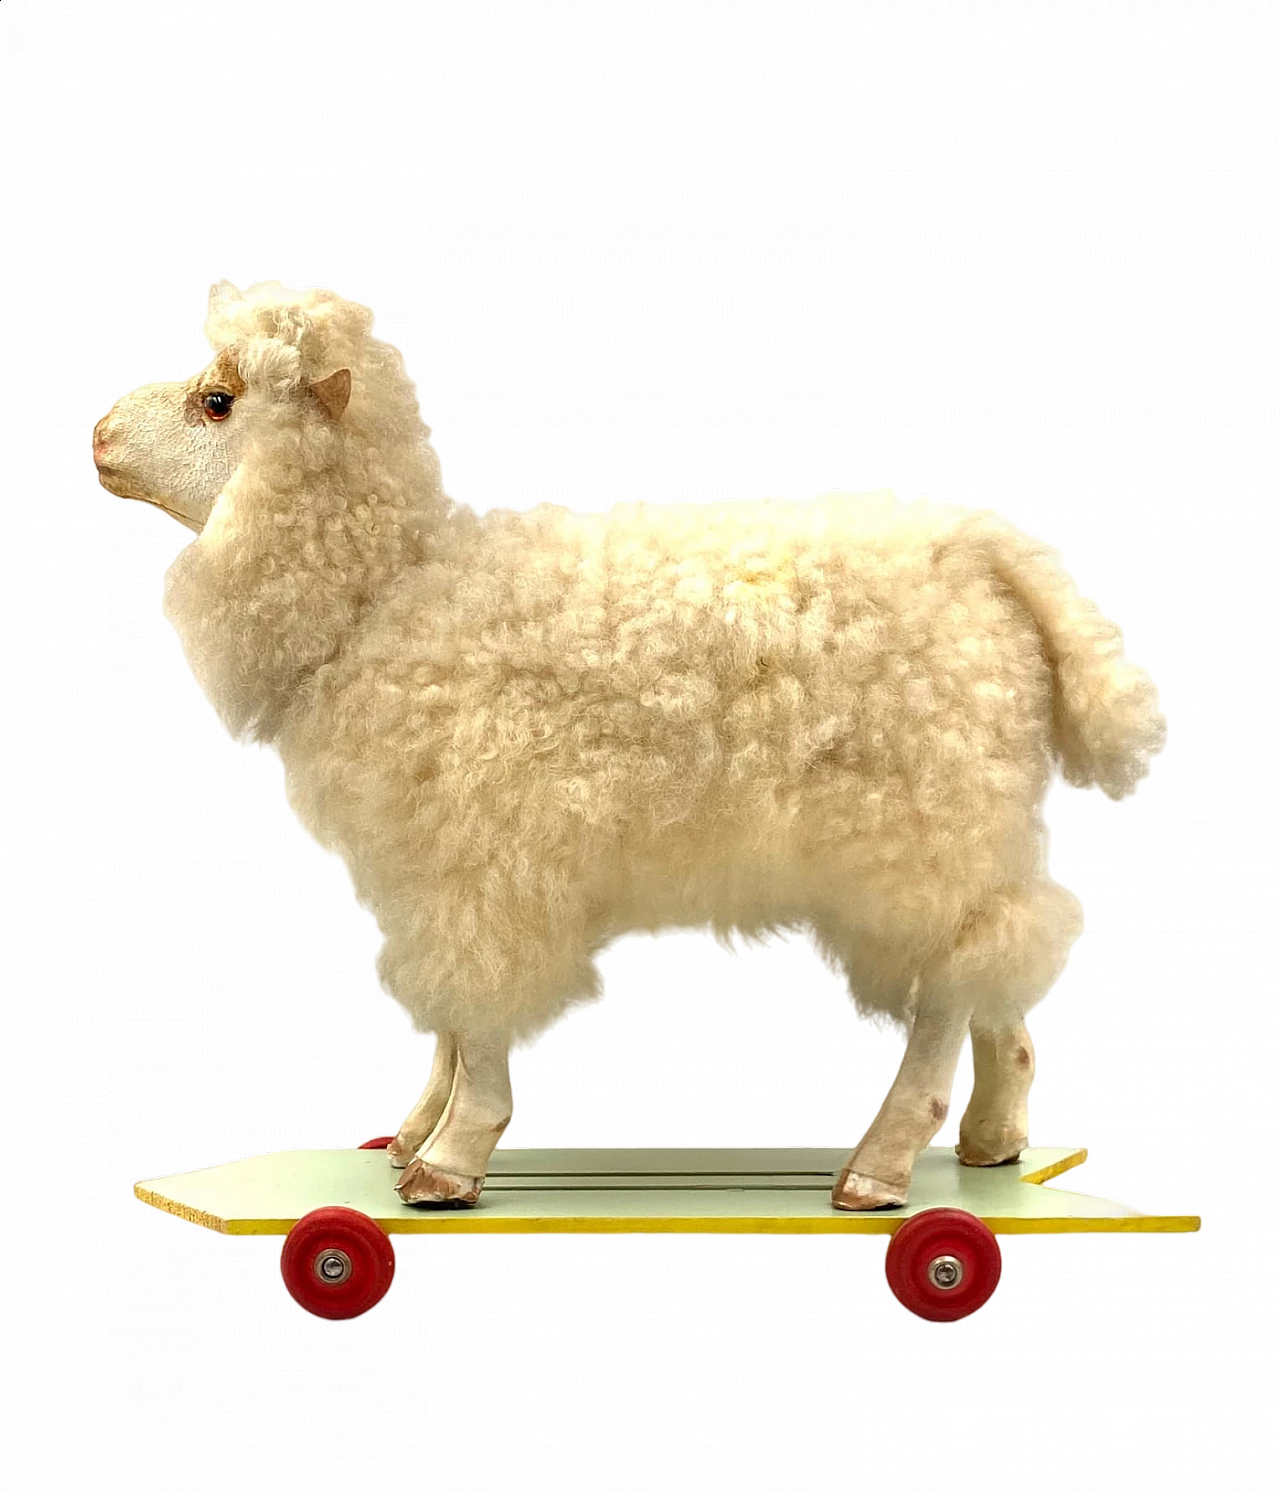 Wool and wood toy sheep with wheels 23